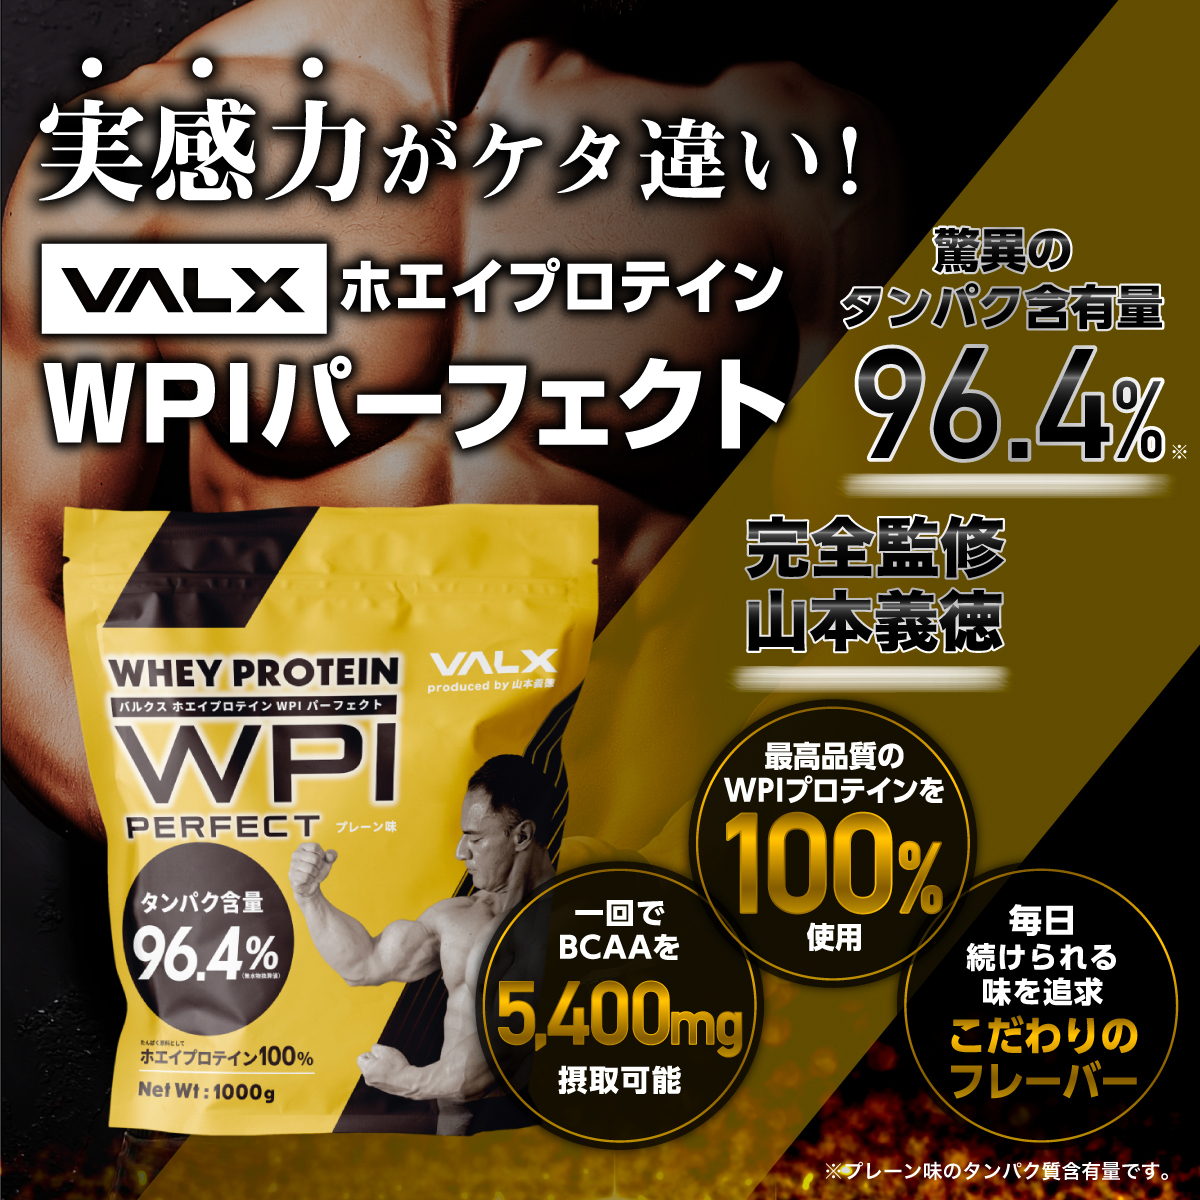 WHEY PROTEIN WPI PERFECT | Informed Choice